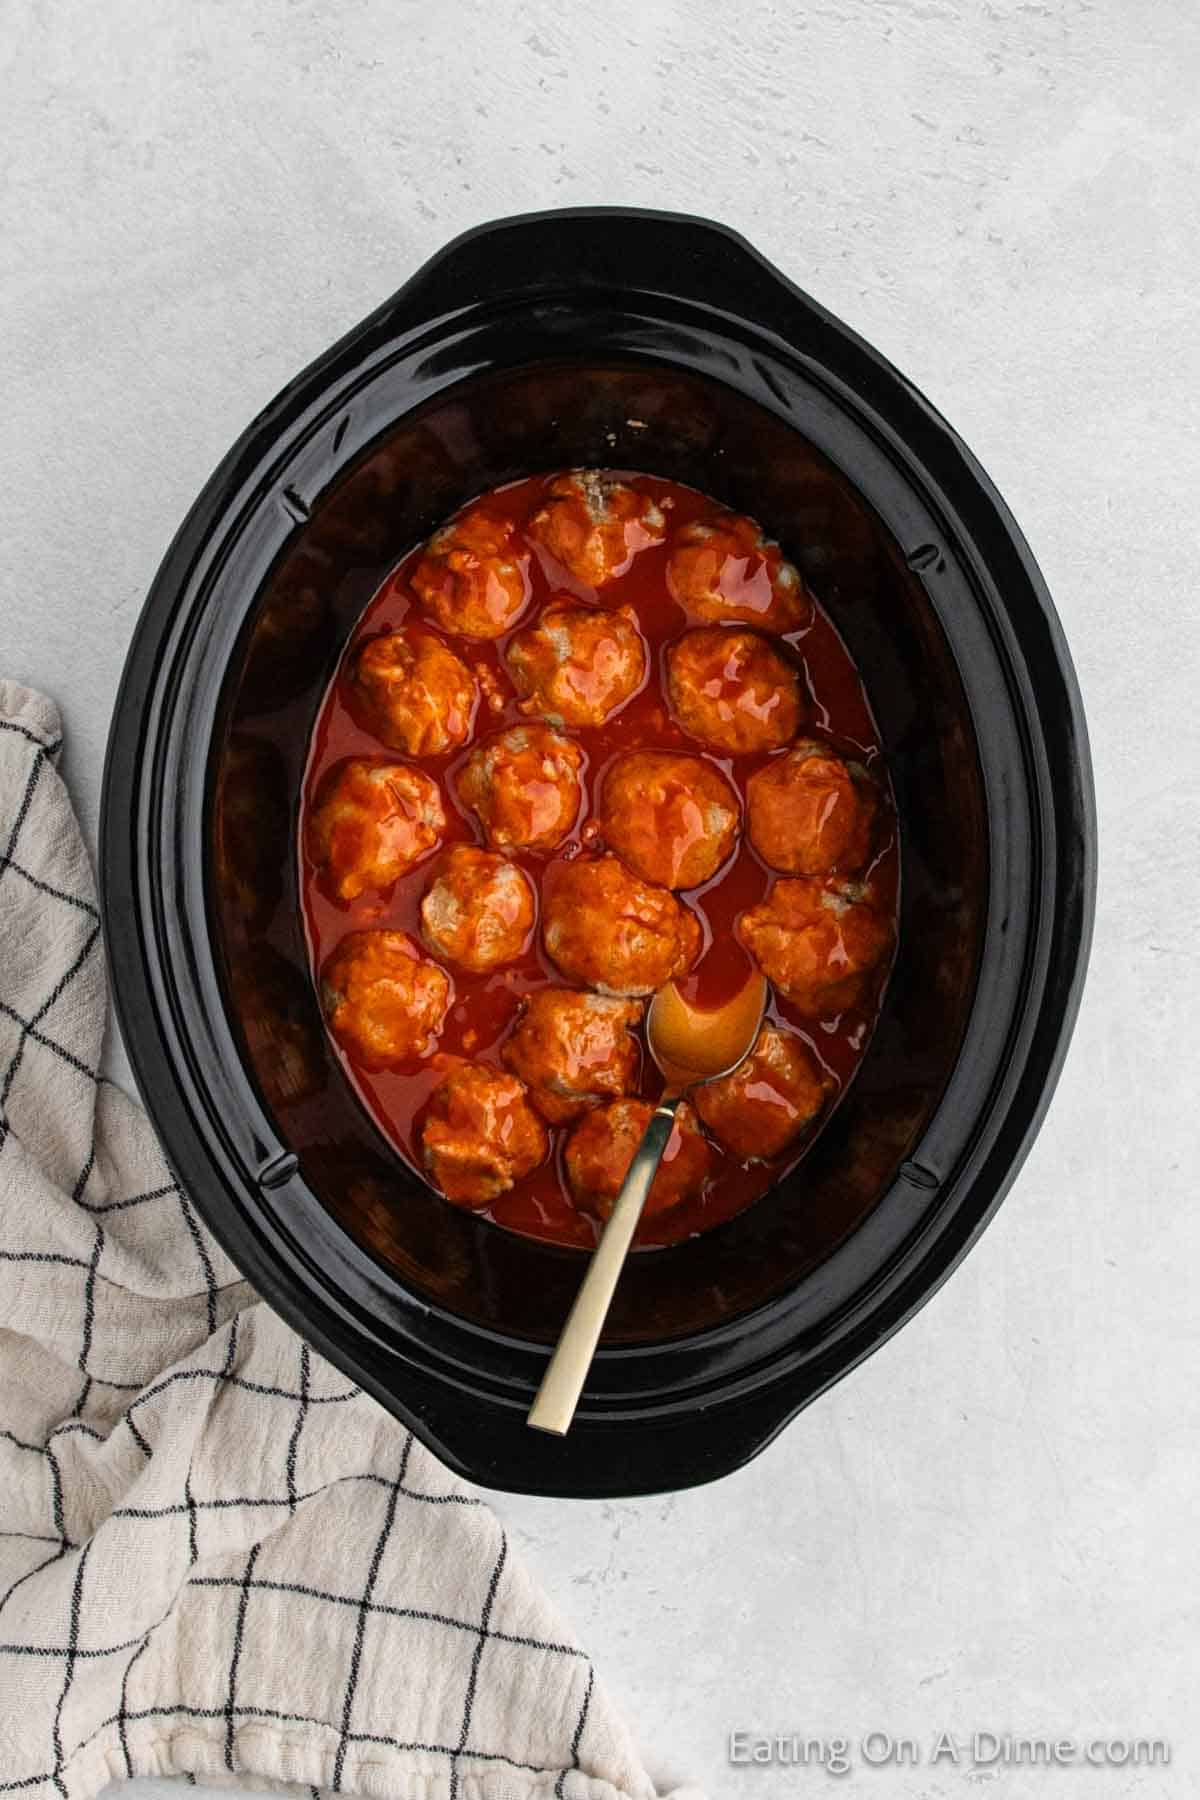 Adding meatballs to the slow cooker and combining with the sauce